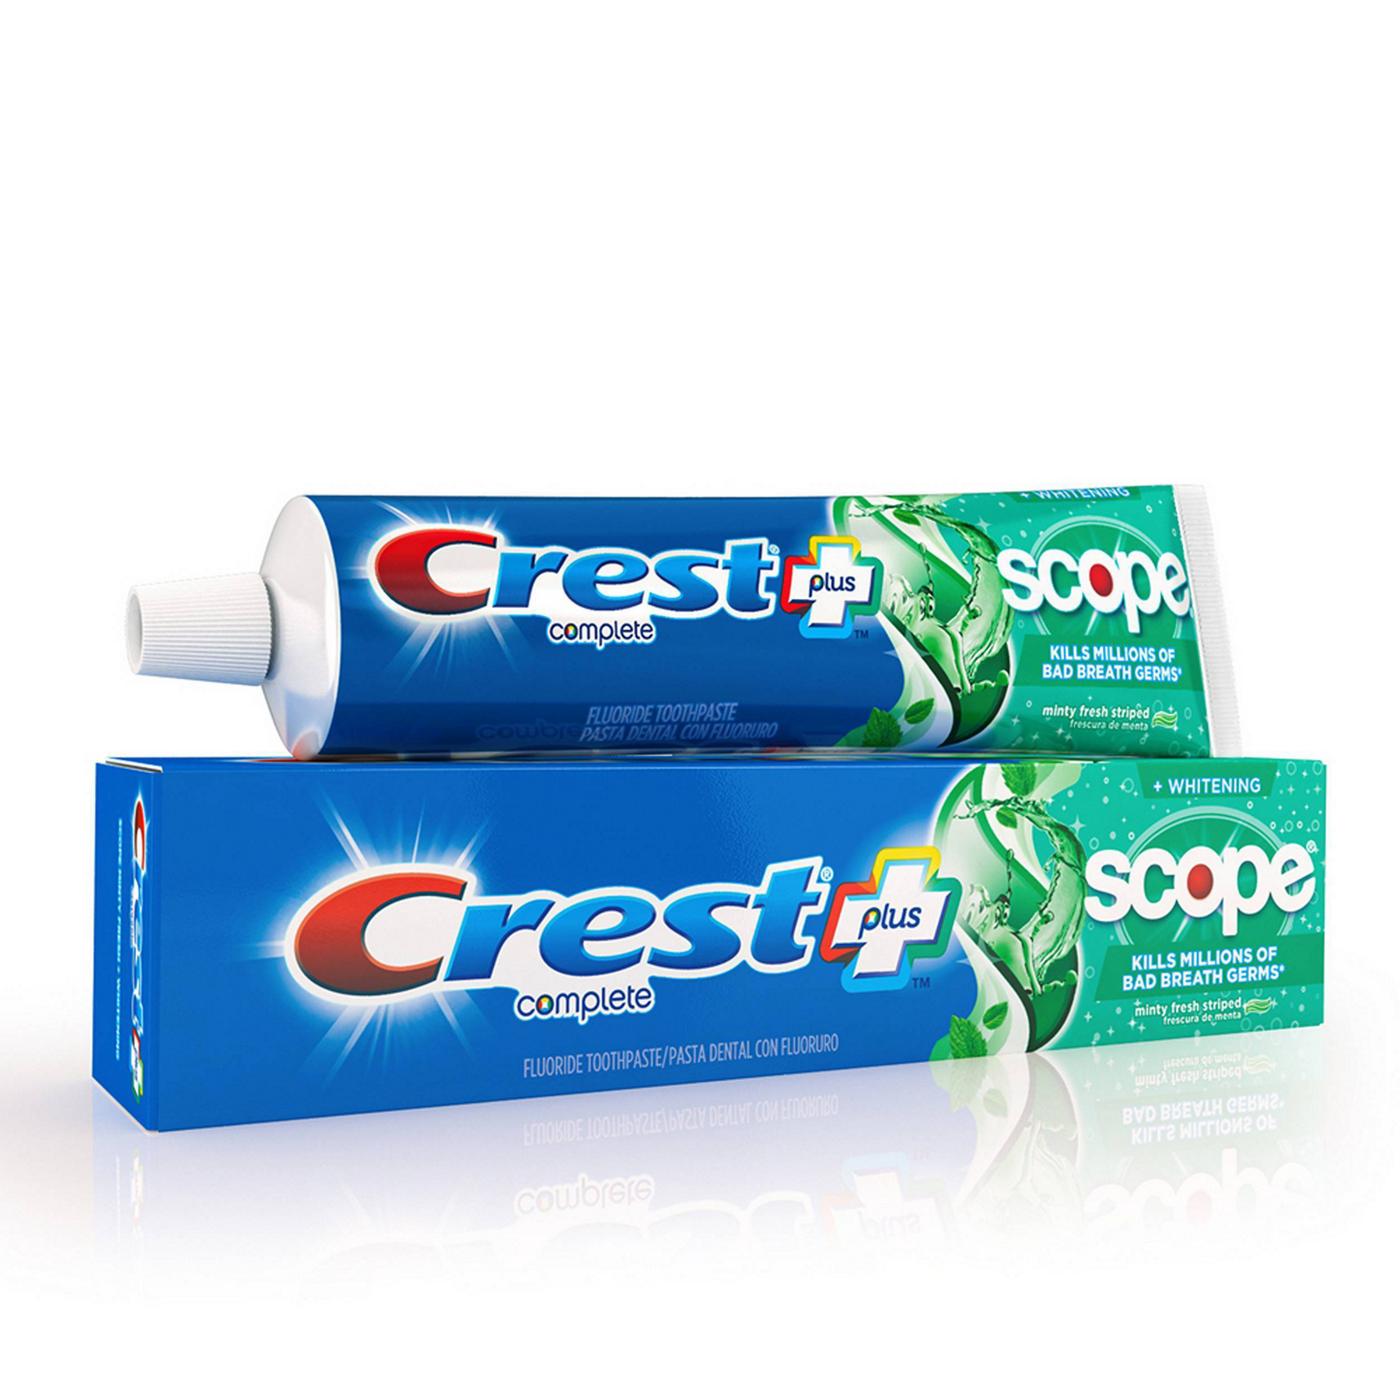 Crest Complete + Scope Whitening Toothpaste - Minty Fresh Striped; image 4 of 10